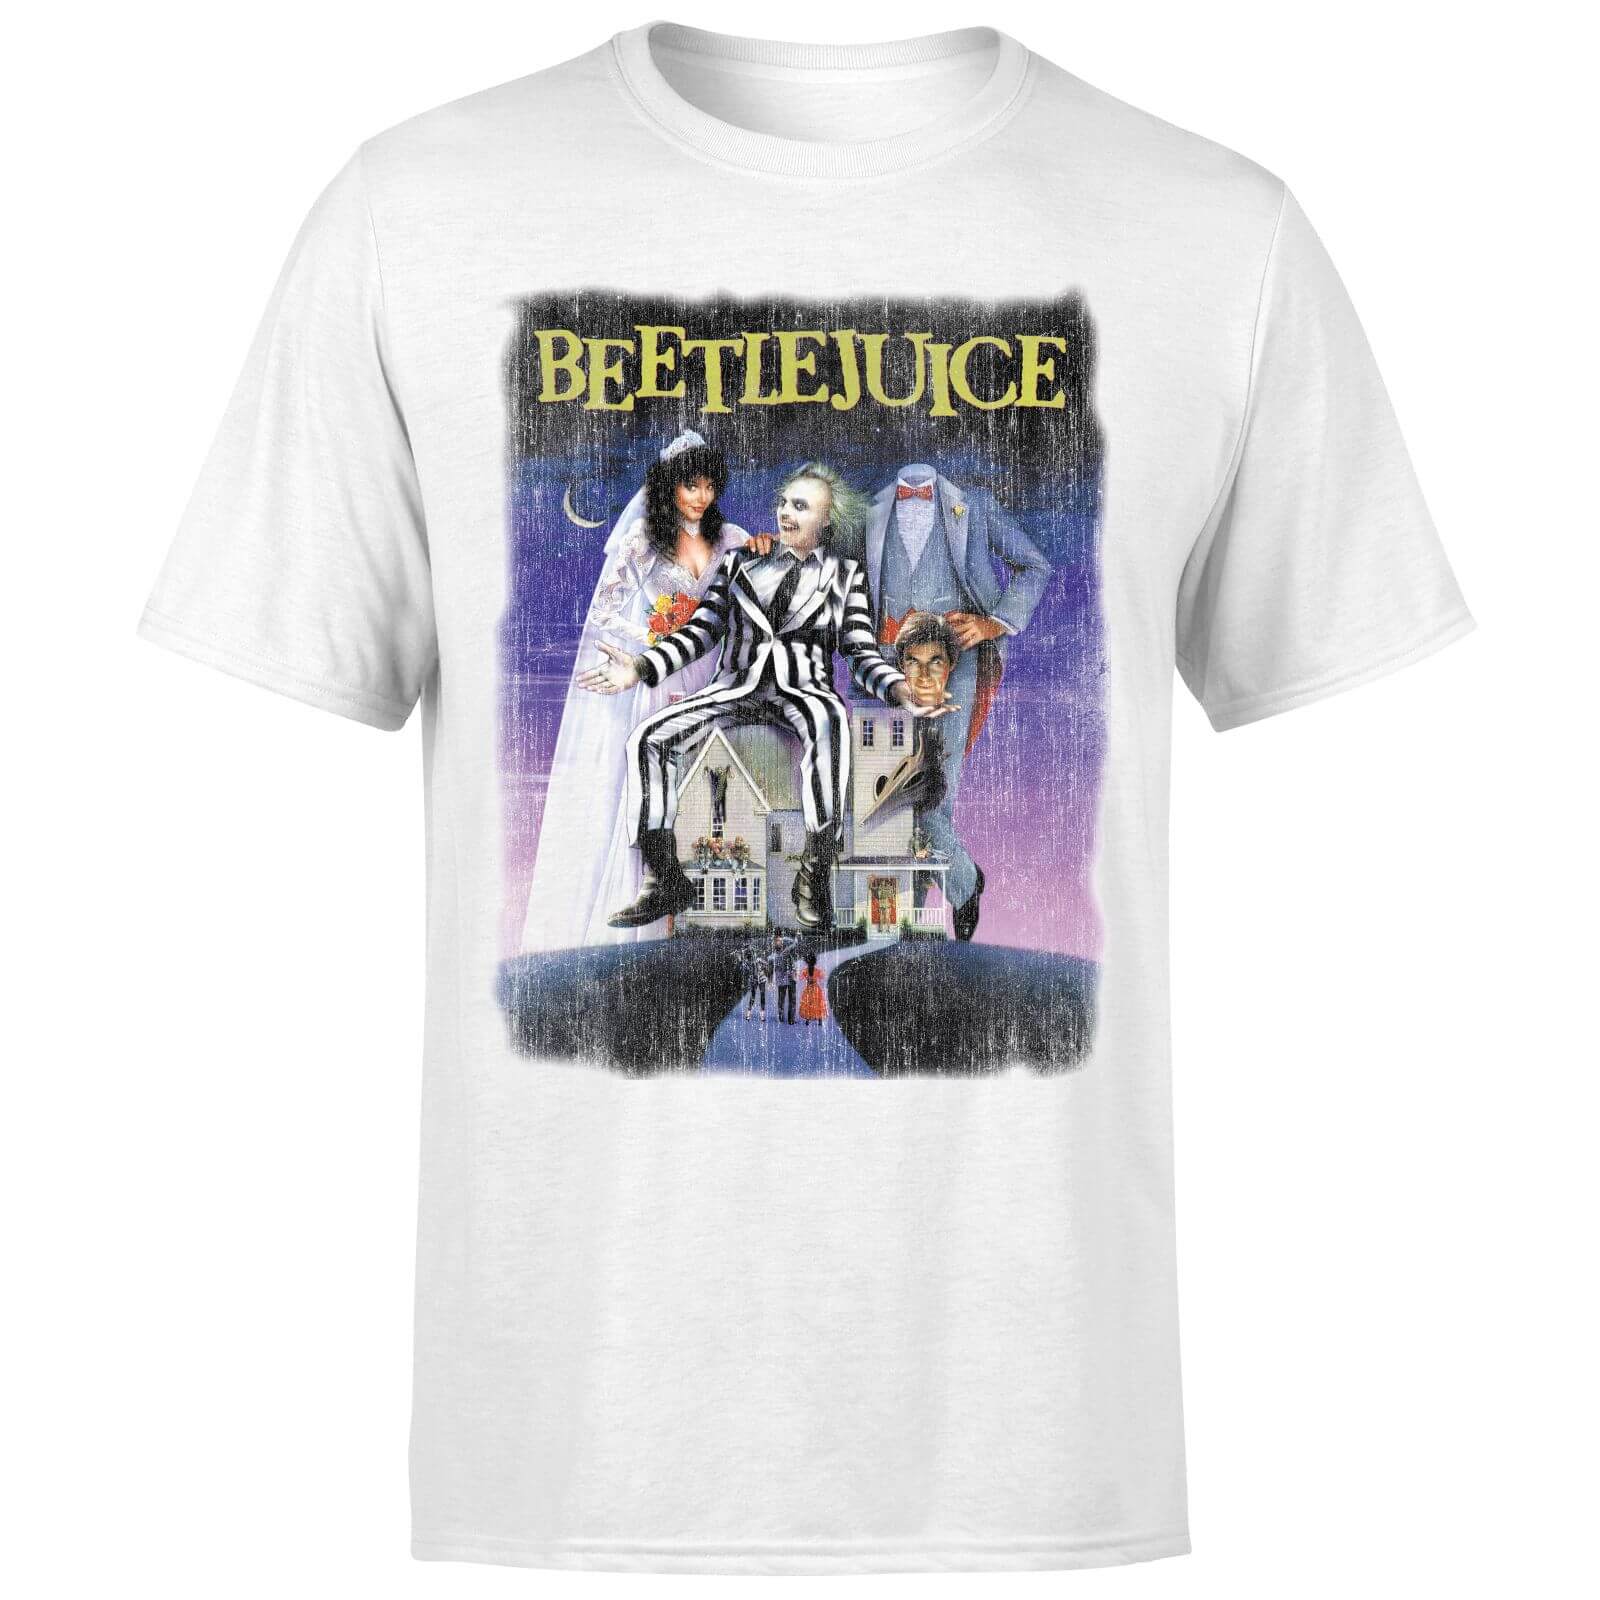 Beetlejuice Distressed Poster T-Shirt - White - L